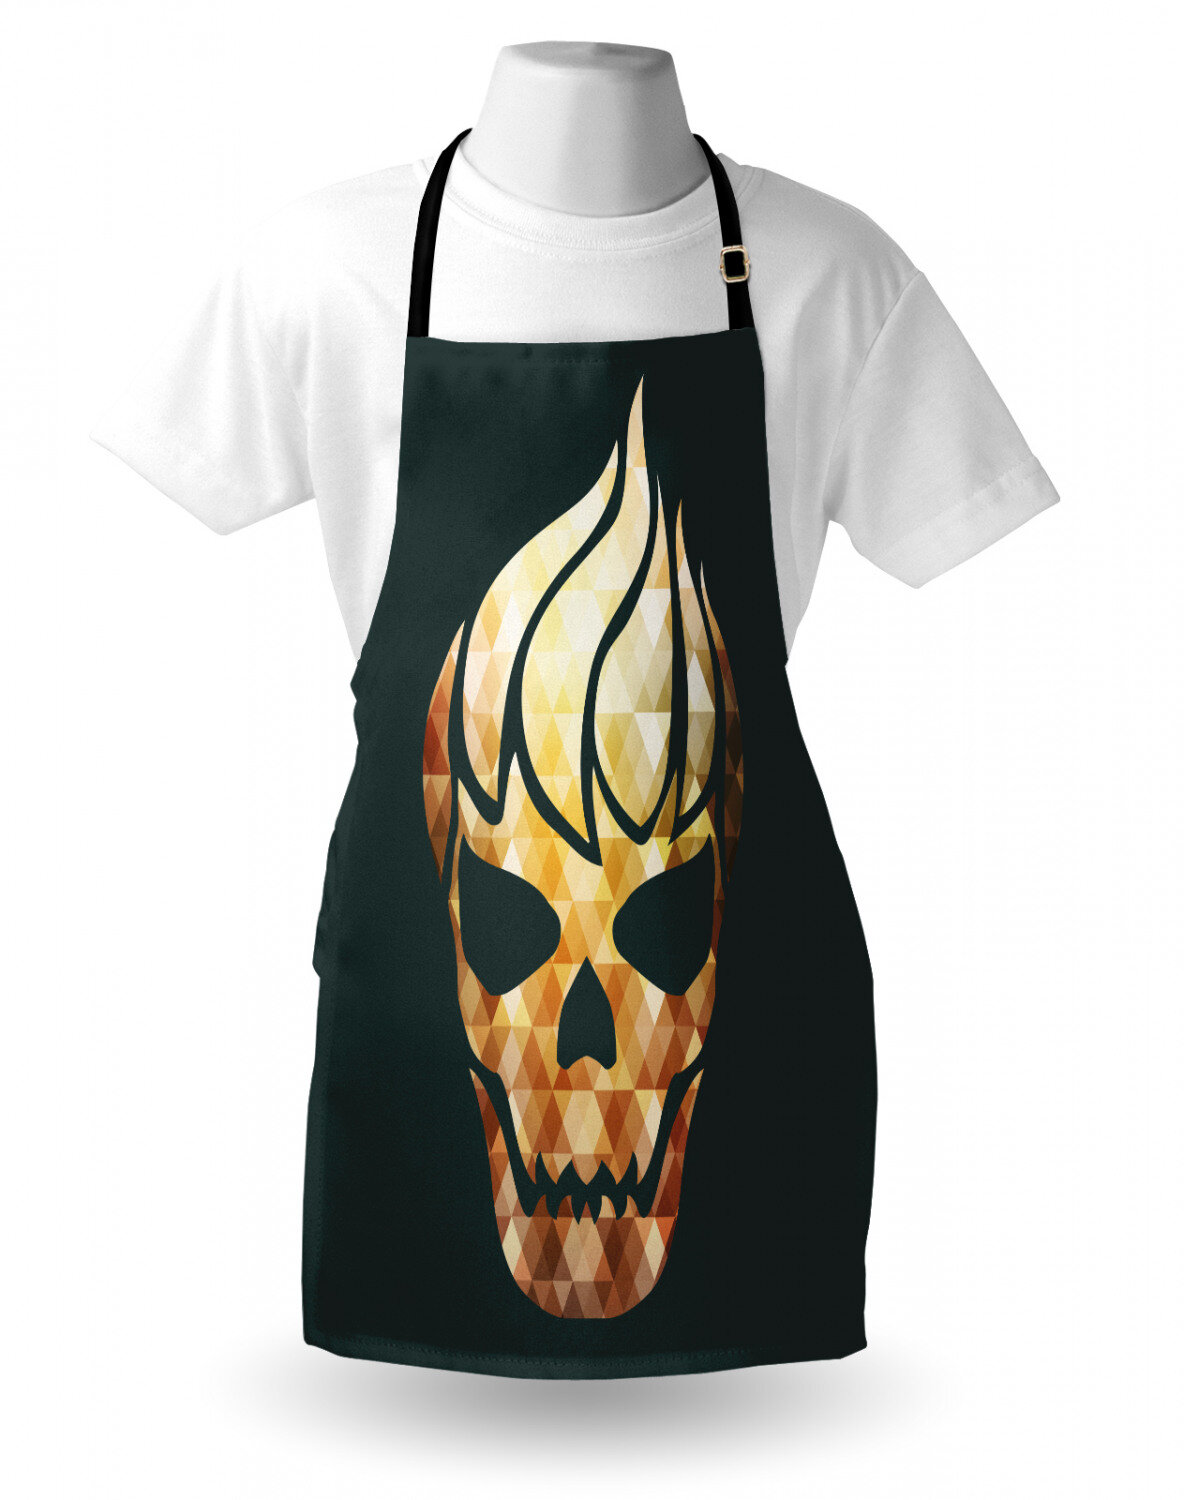 Skull Chef Funny Aprons Kitchen Cooking Apron BBQ Grill Gift for Dad Men Women